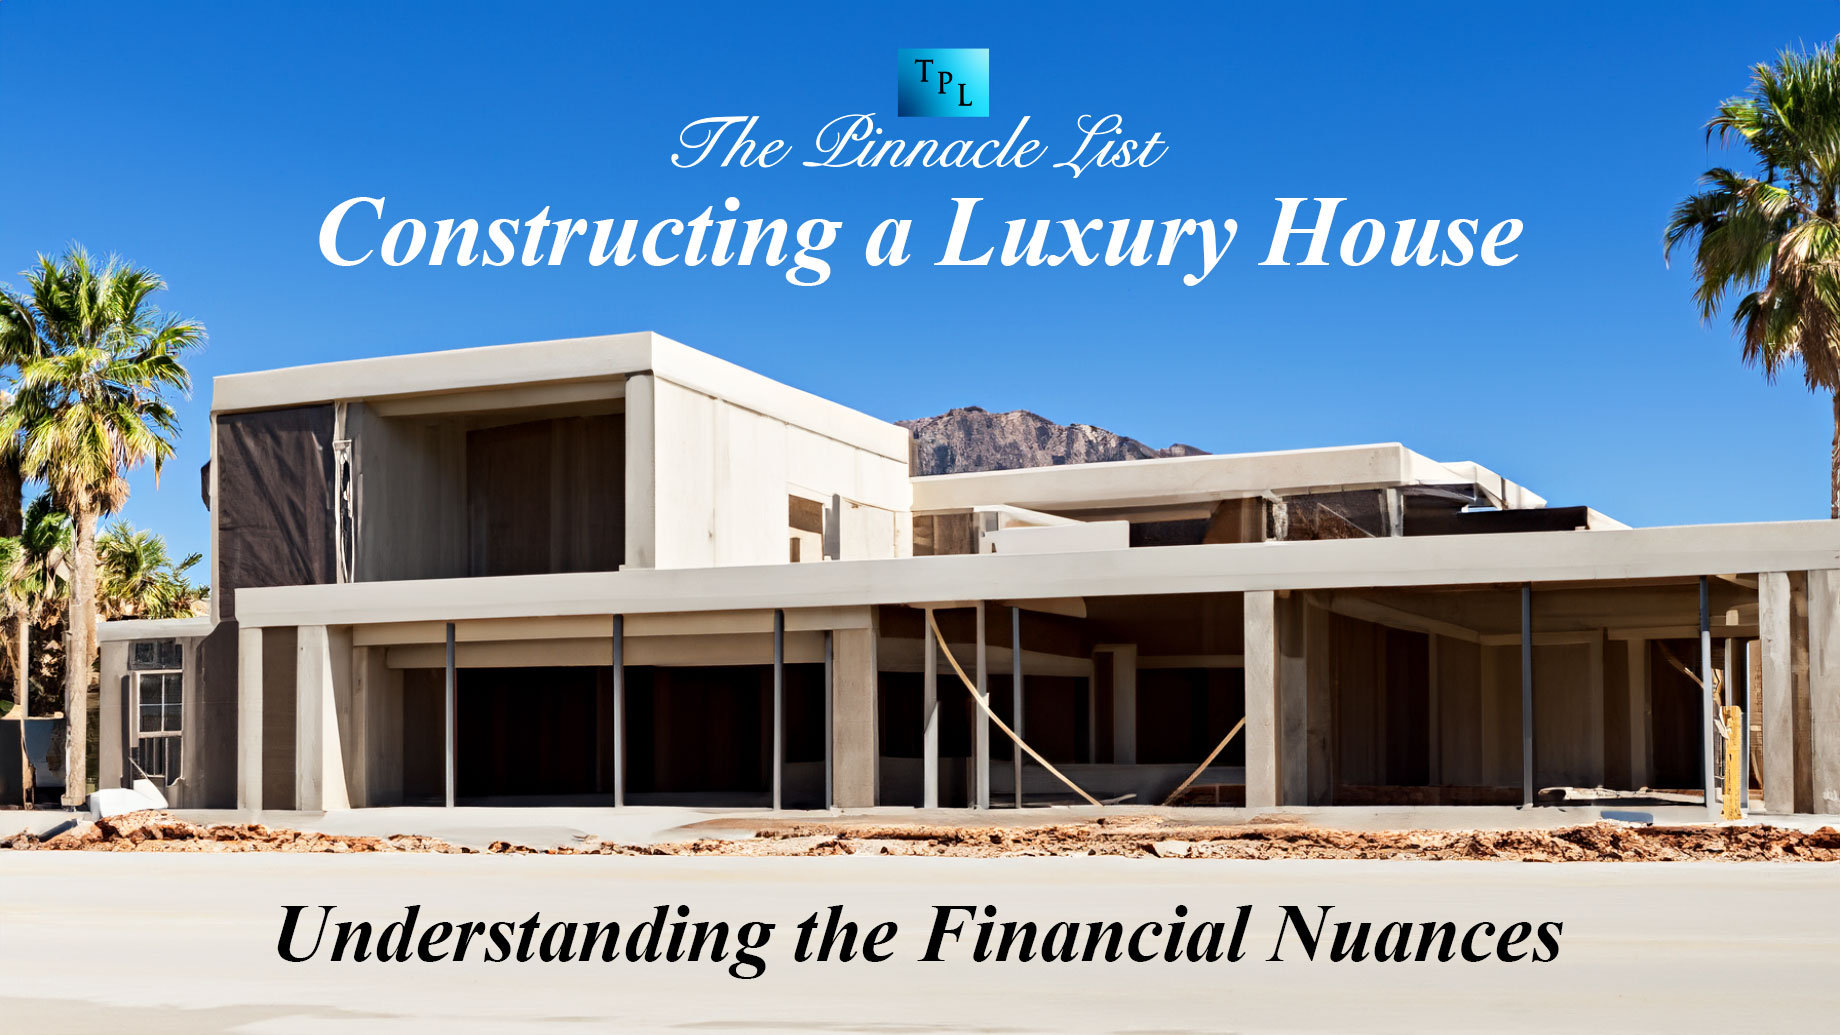 Constructing a Luxury House: Understanding the Financial Nuances